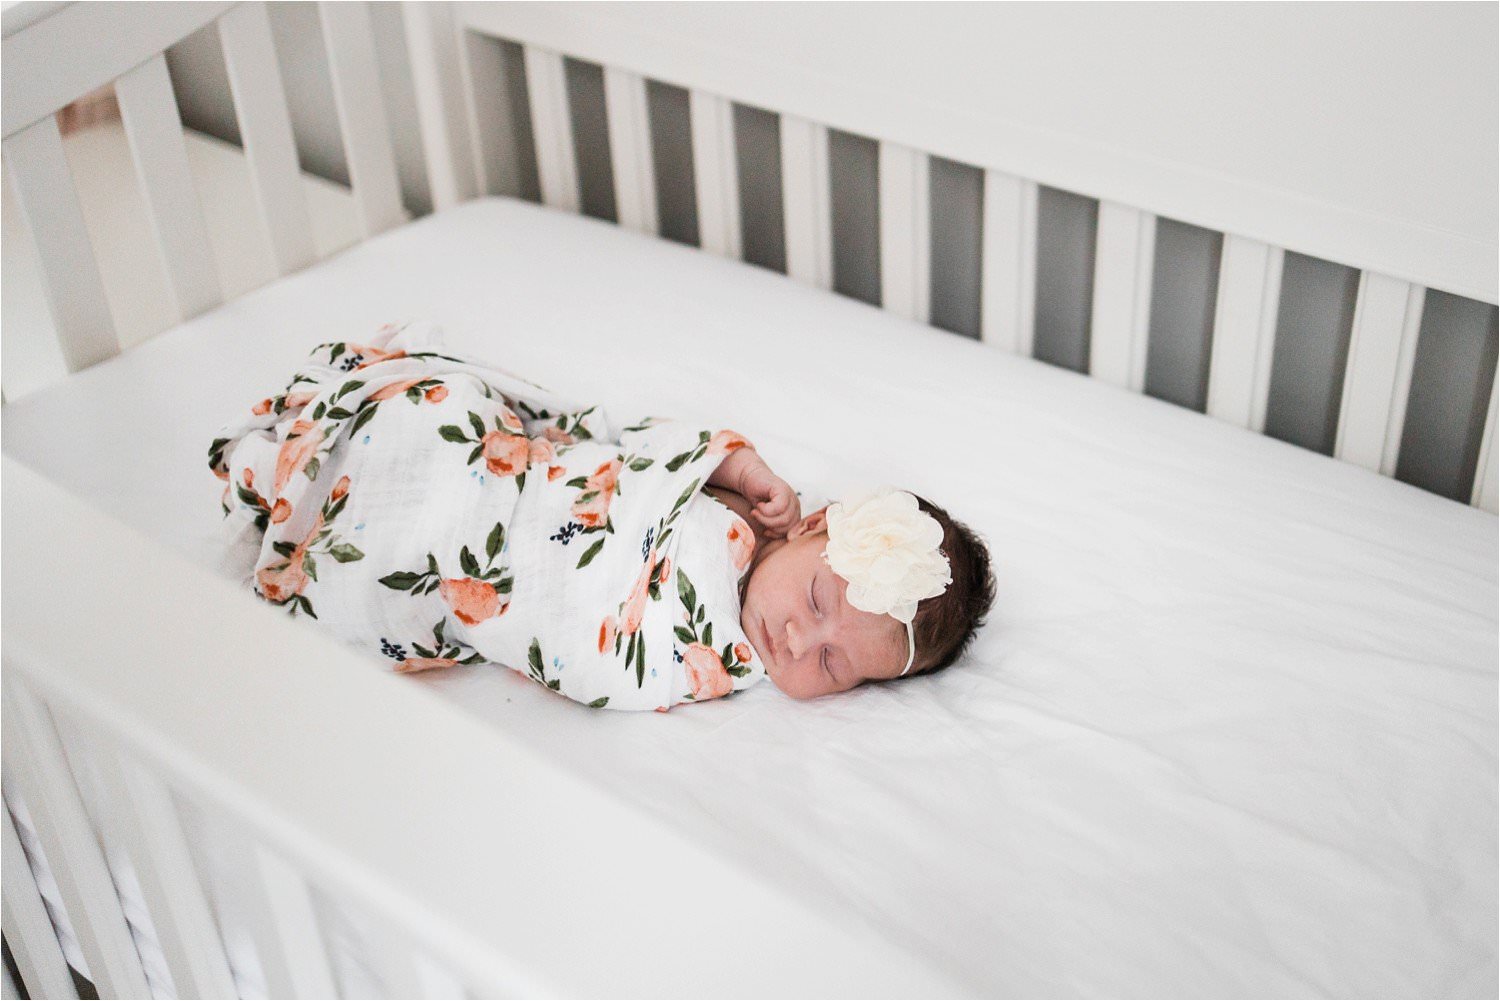 baby in floral swaddle in crib at home